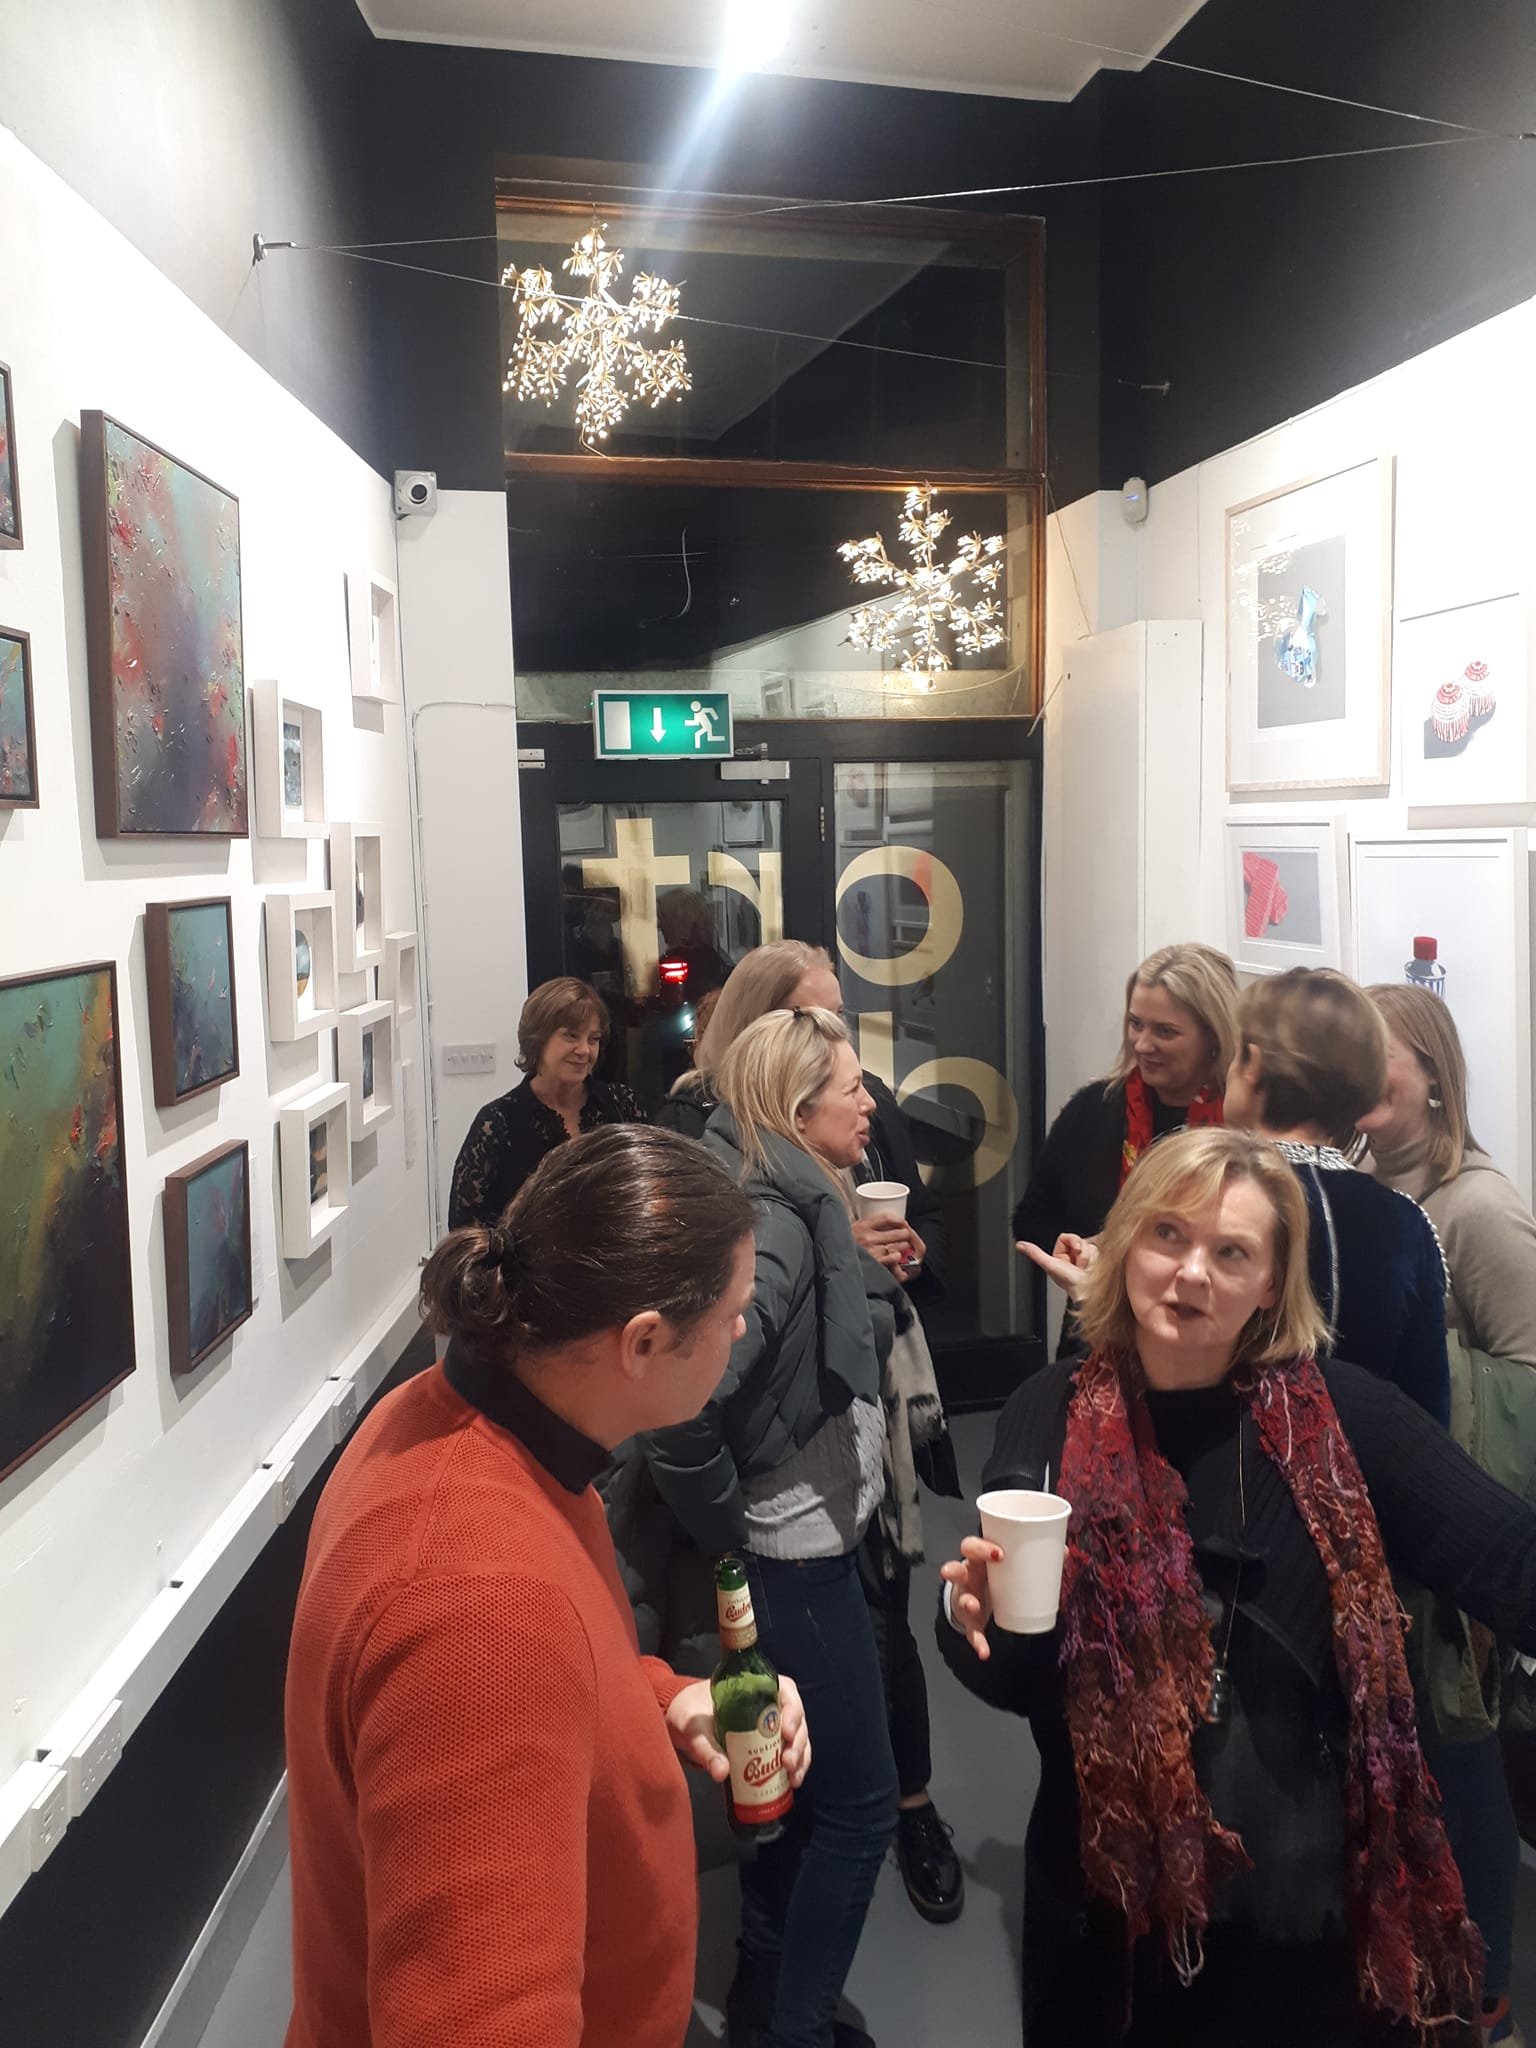 Art, mulled wine and mince pies on a bitterly cold night in Ranelagh